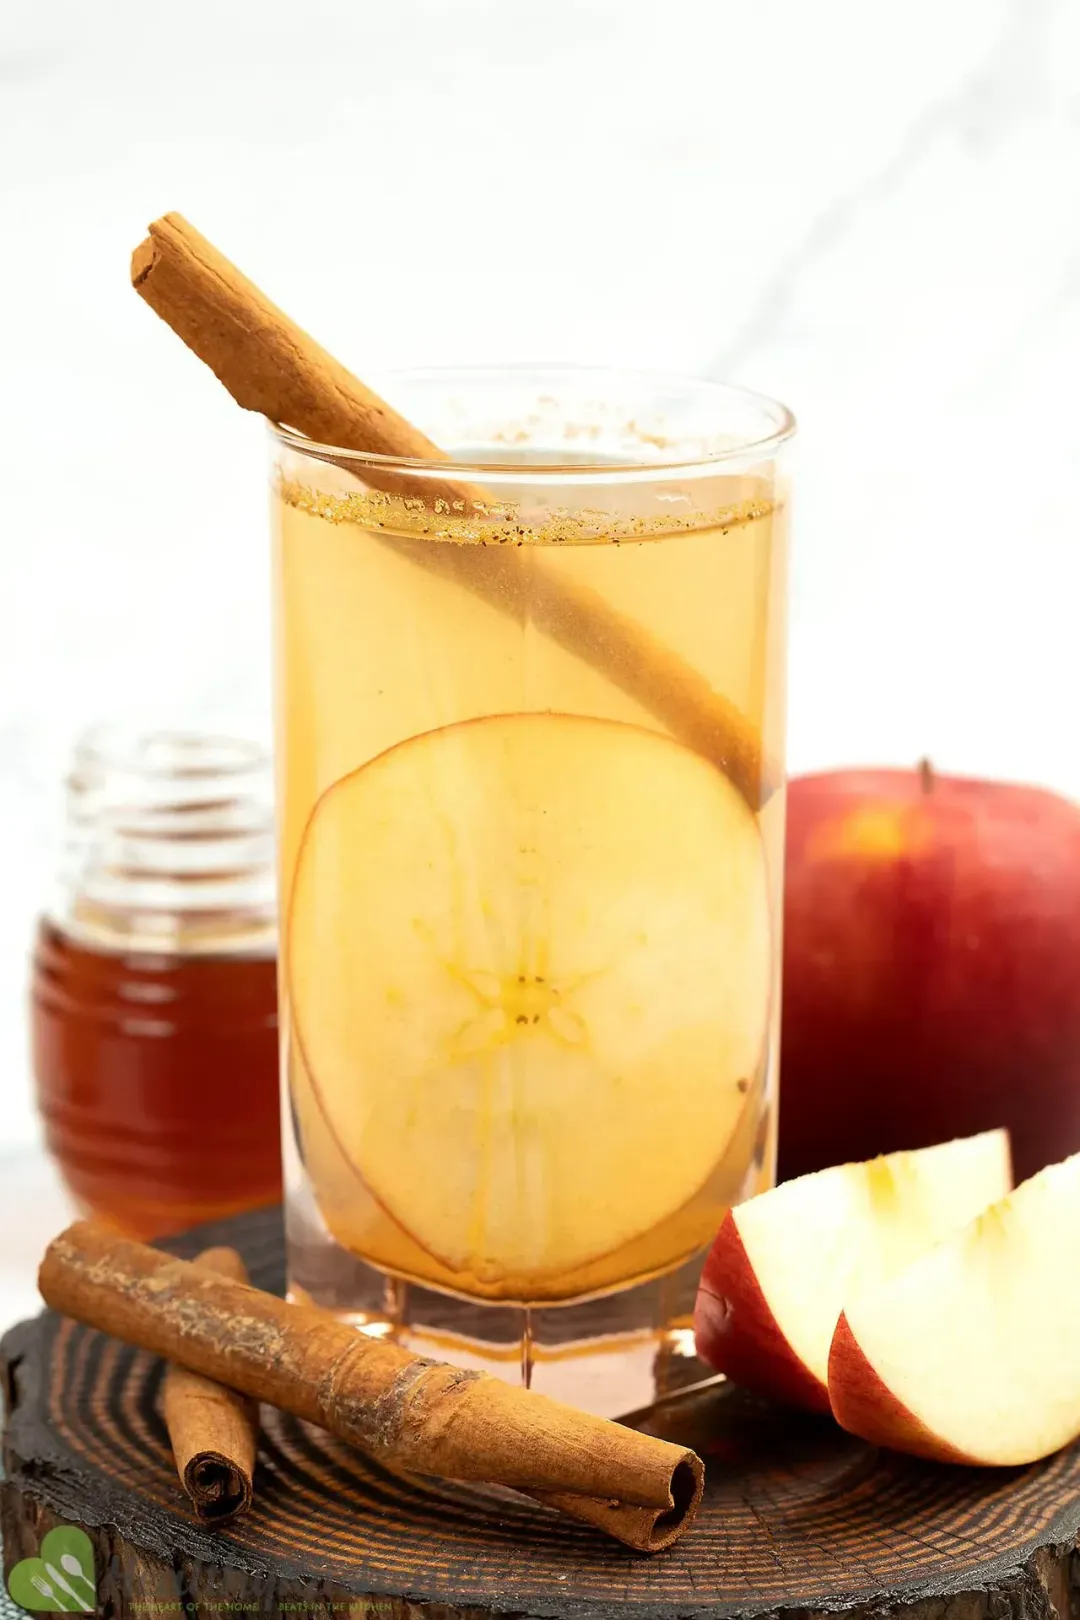 A shot glass of apple vinegar honey with cinnamon sticks, red apple wedges, and a honey jar